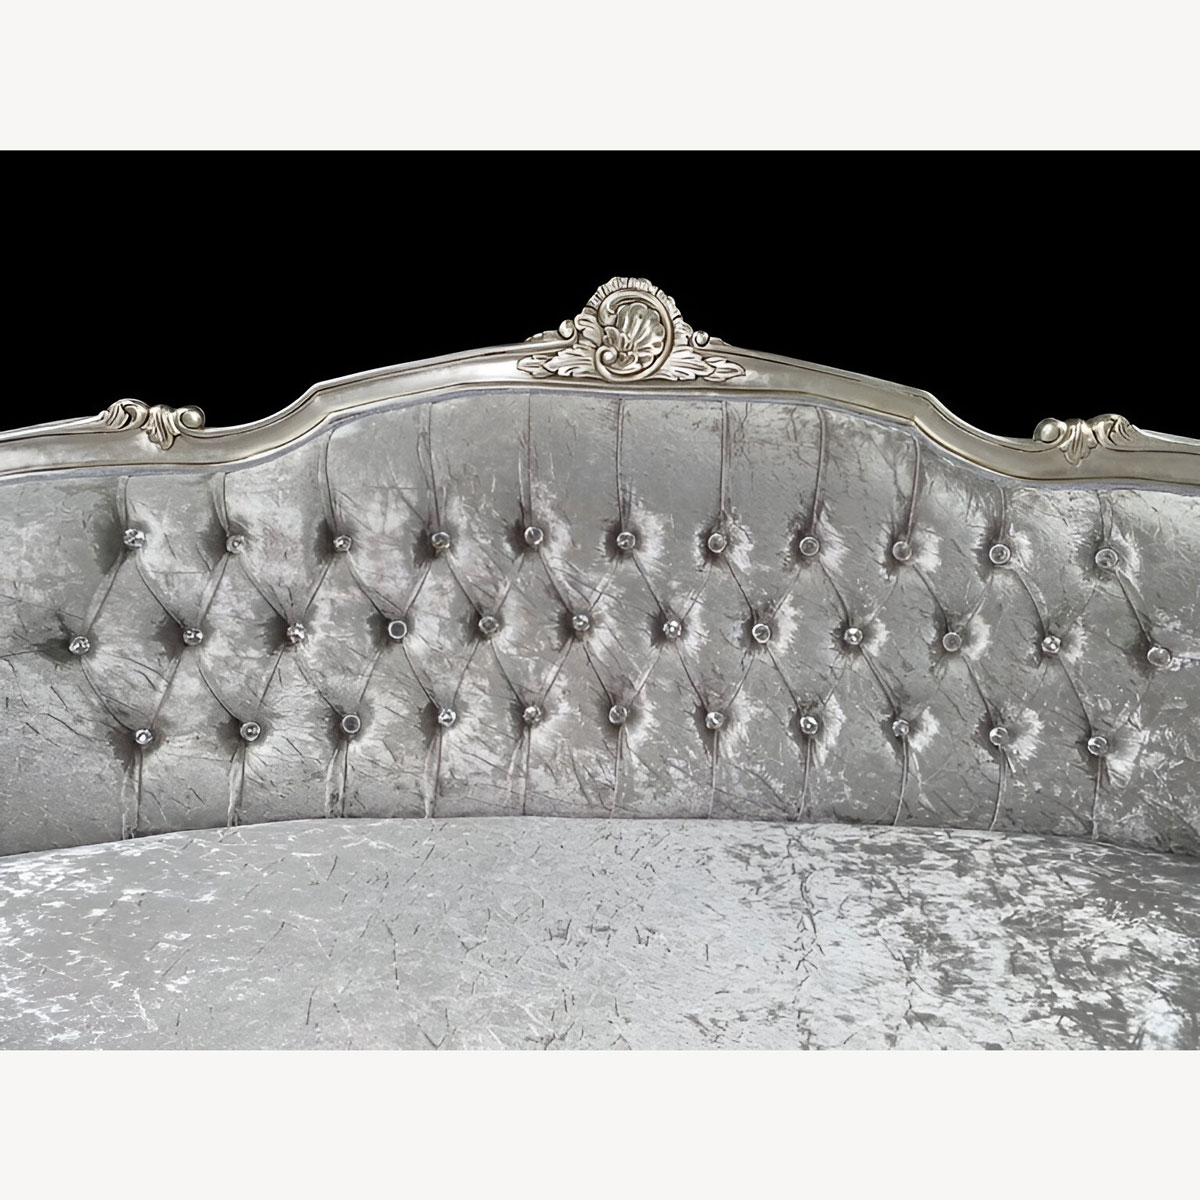 Imperial Gold Gilded Sofa 3 - Hampshire Barn Interiors - Scot Wedding Suite Silver Leaf With Silver Crushed Velvet And Crystals -